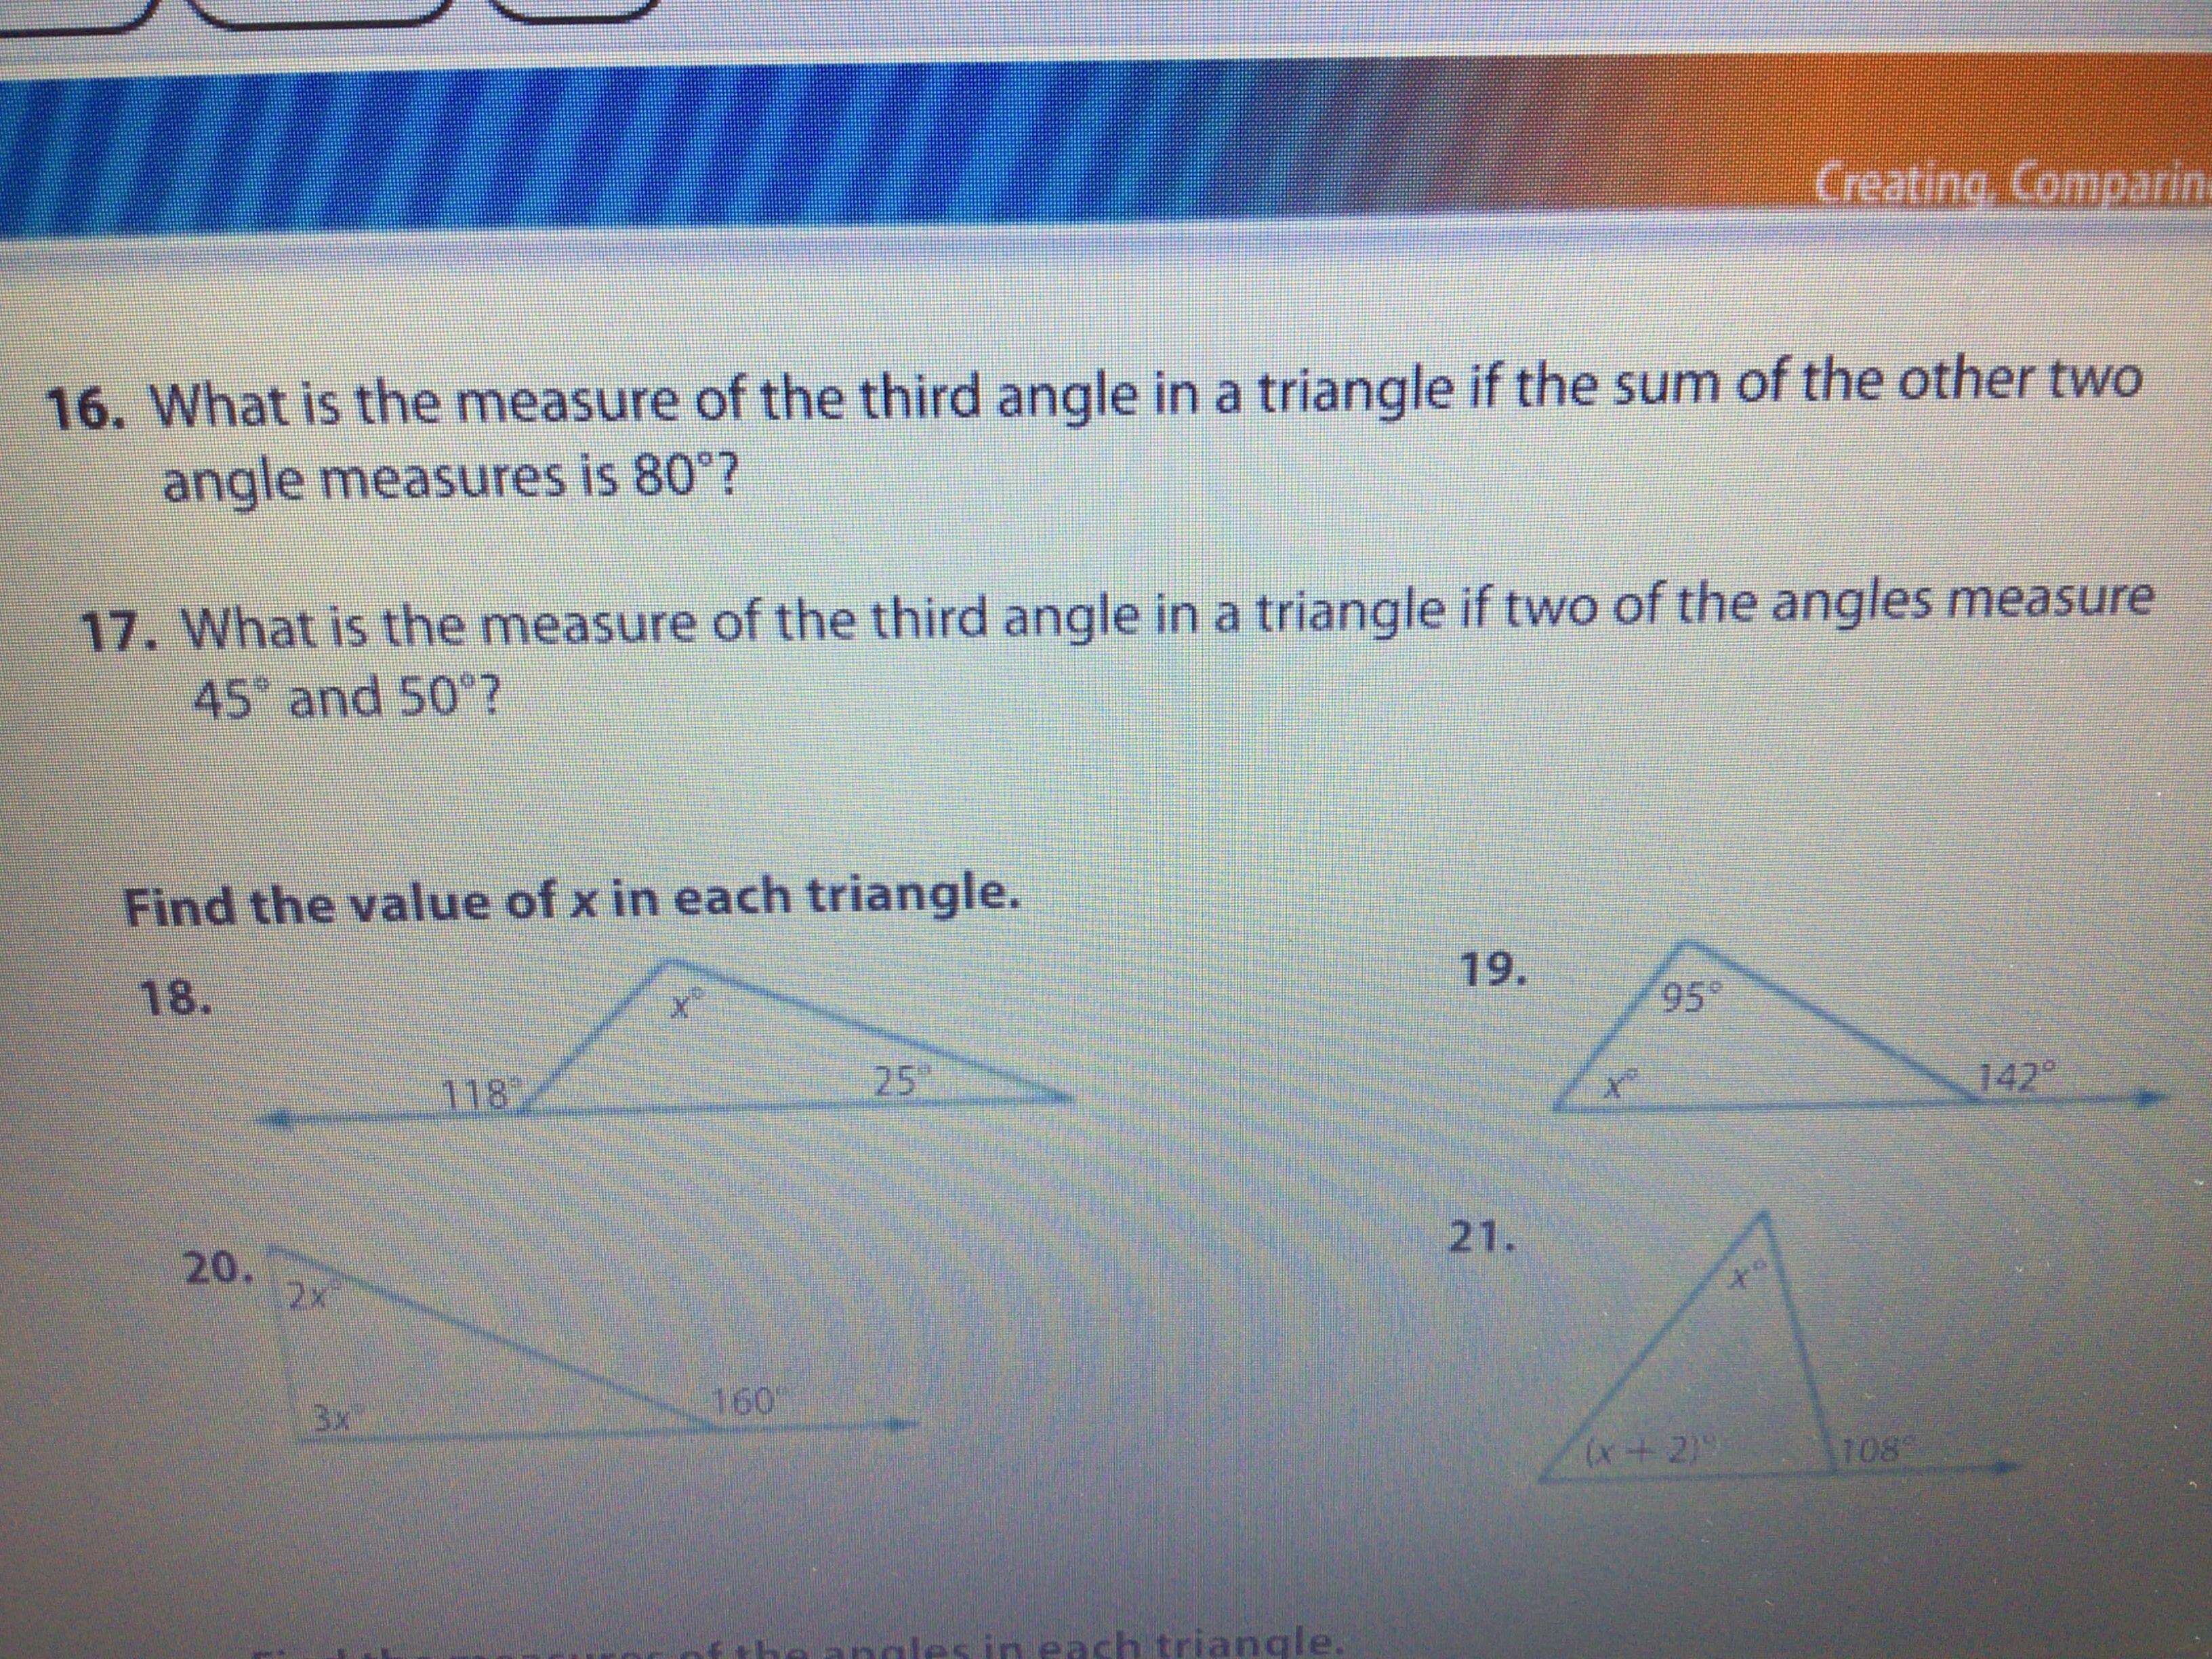 Please Help I Need Help With #17, 19, And 21